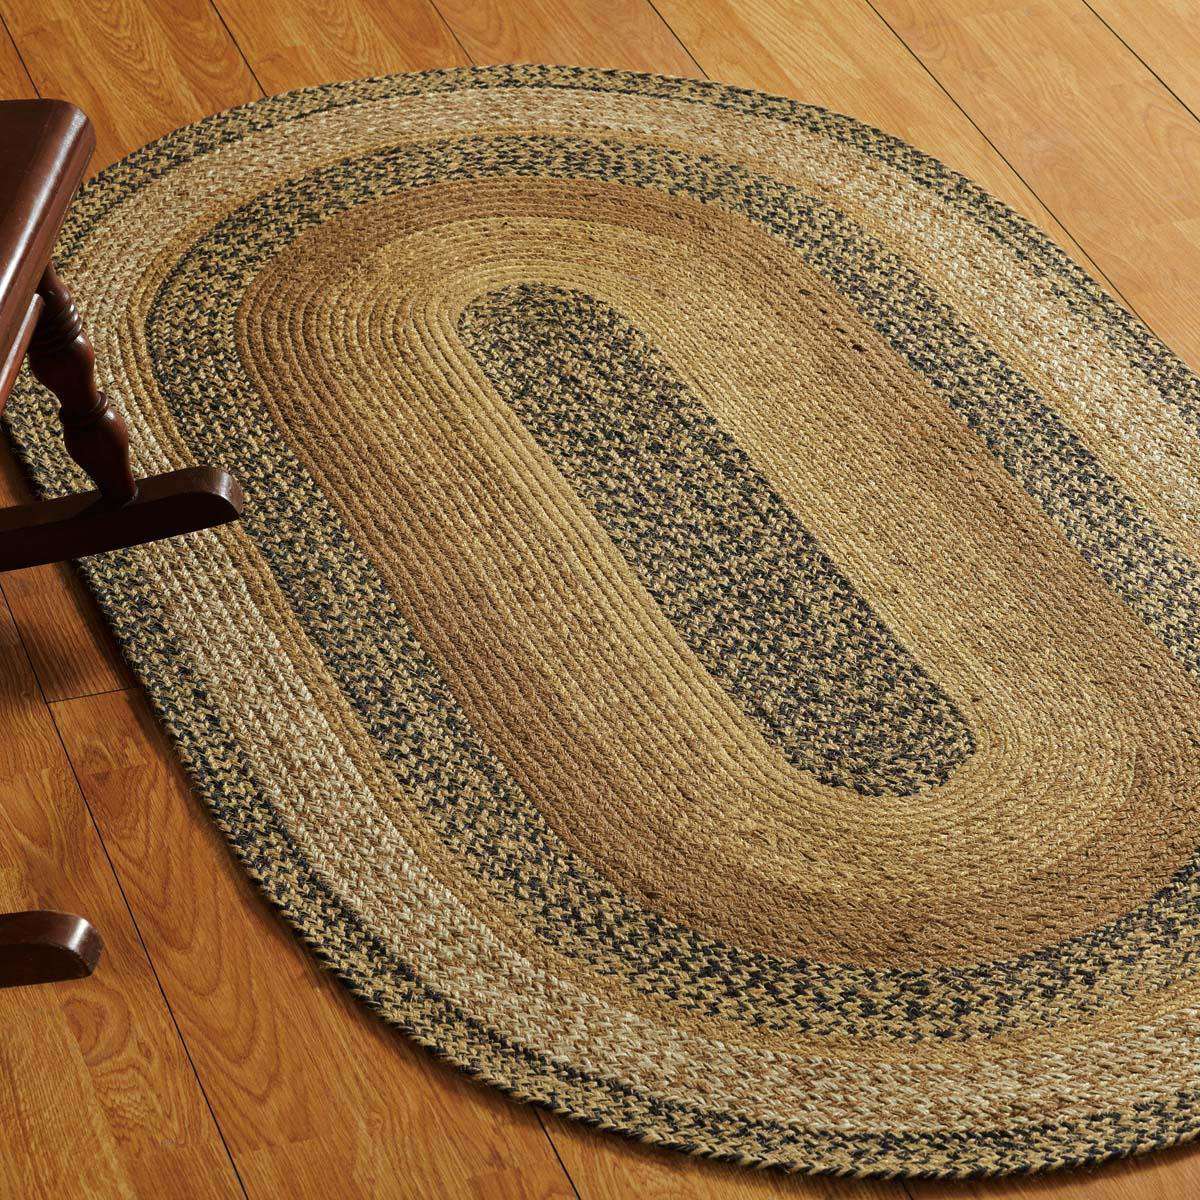 Kettle Grove Jute Oval Braided Rug VHC Brands rugs CWI Gifts 